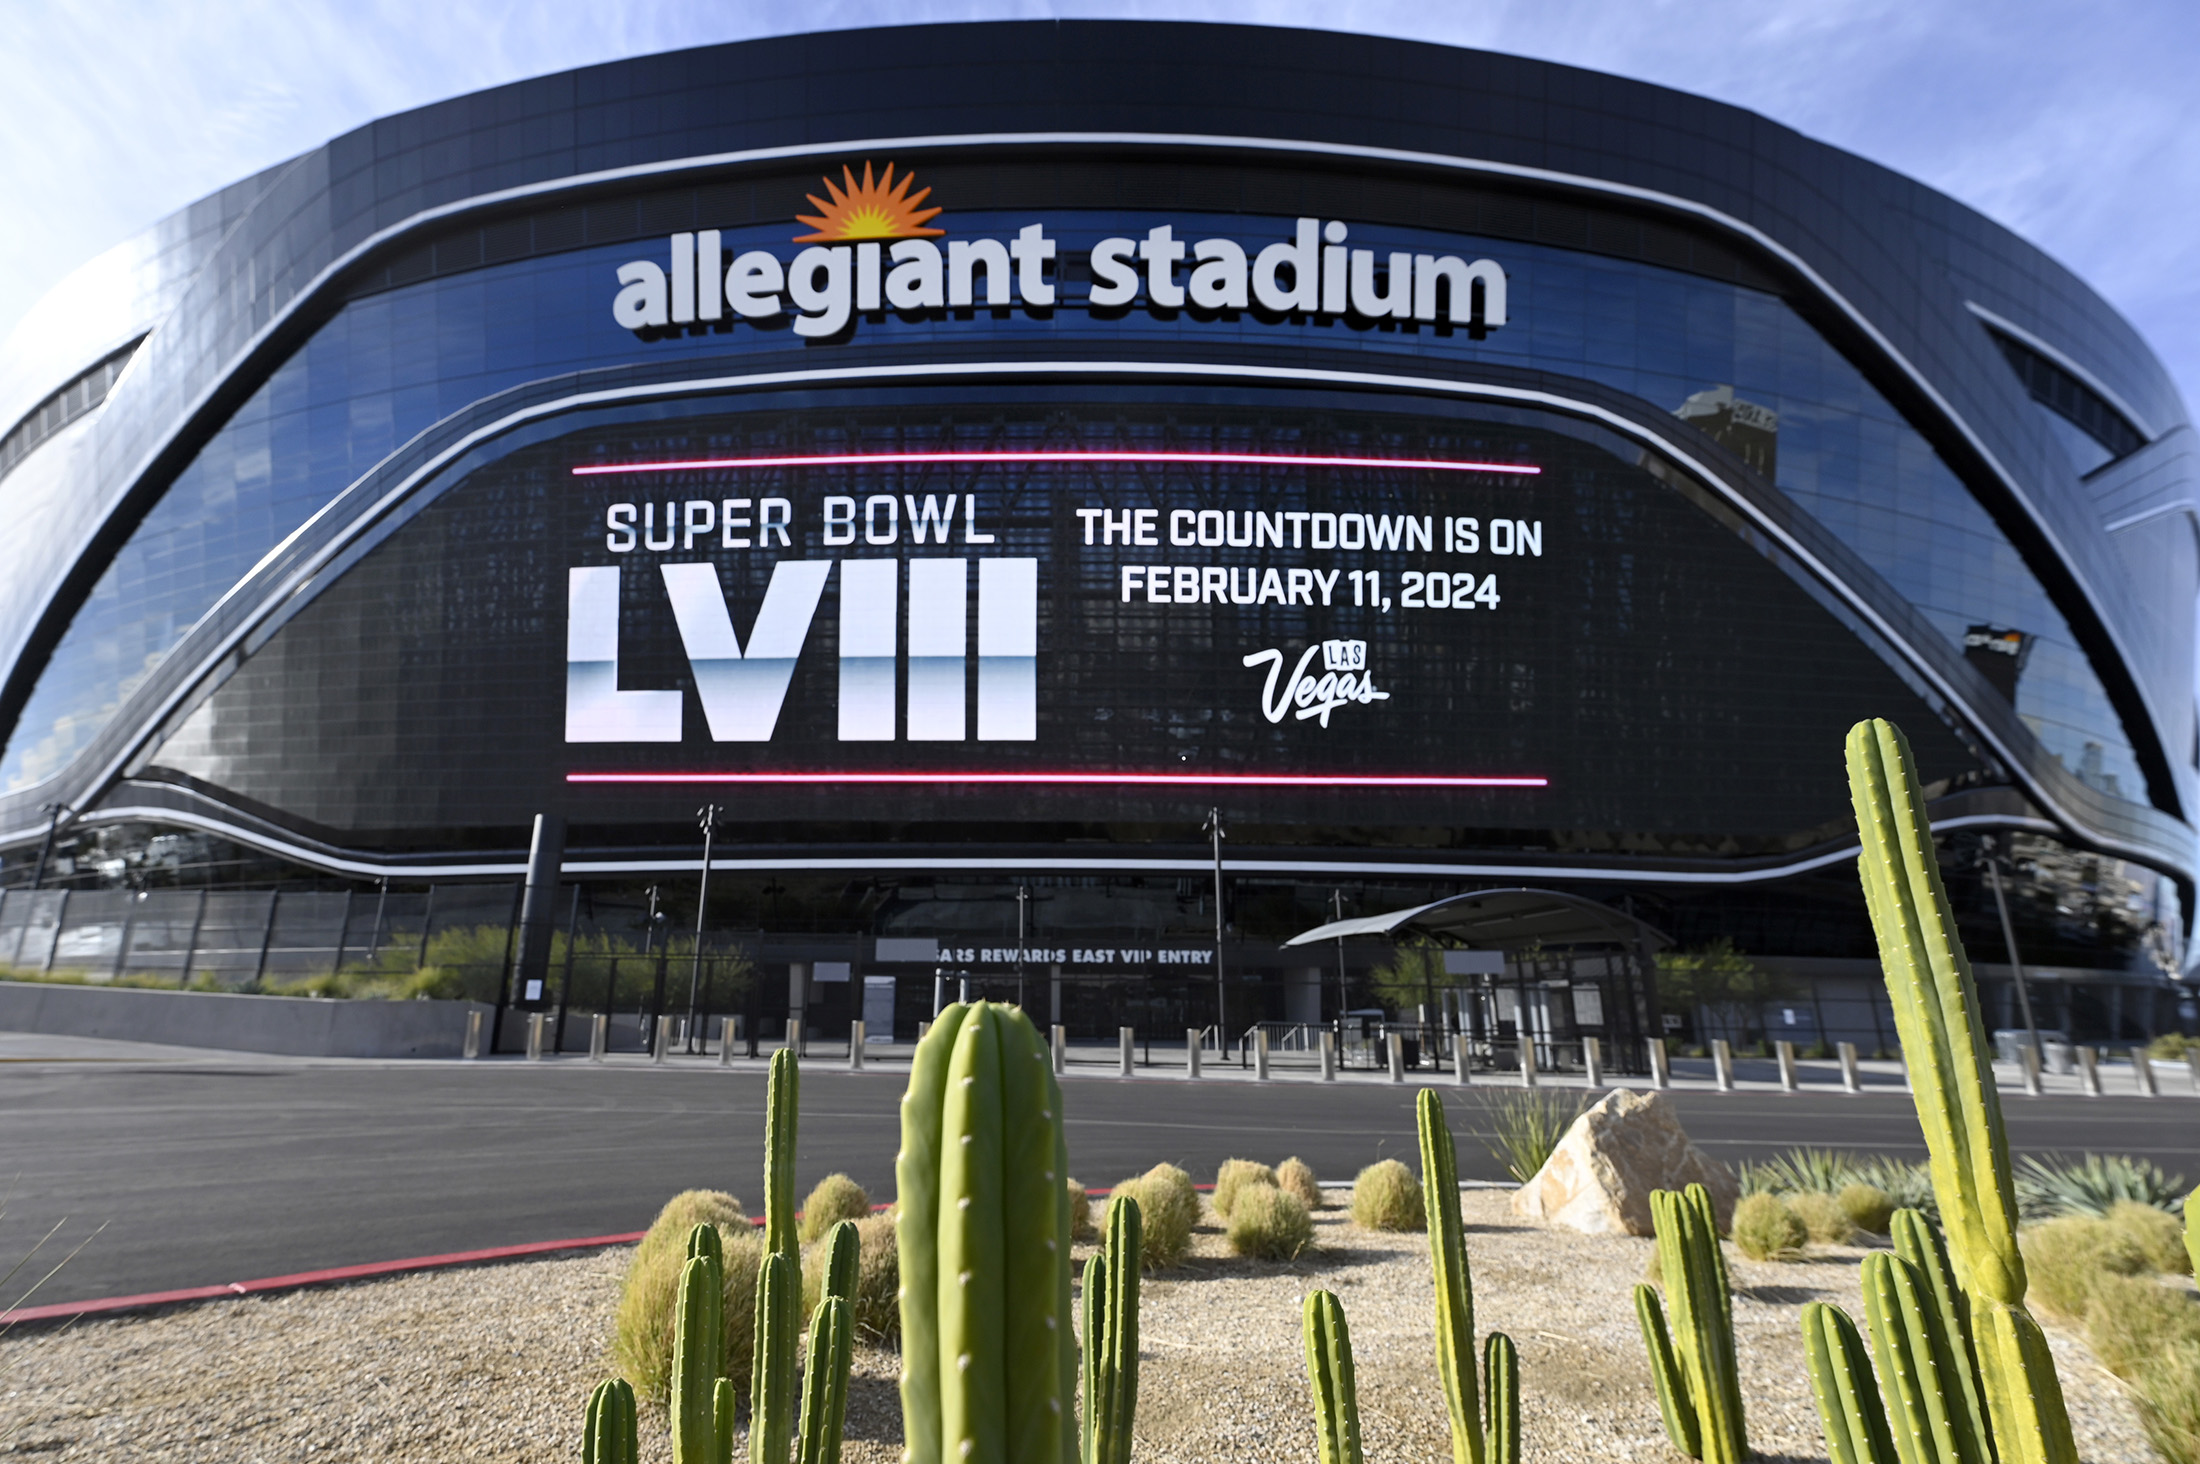 Super Bowl Tickets Chiefs49ers Game in Las Vegas Set Record at 9,800